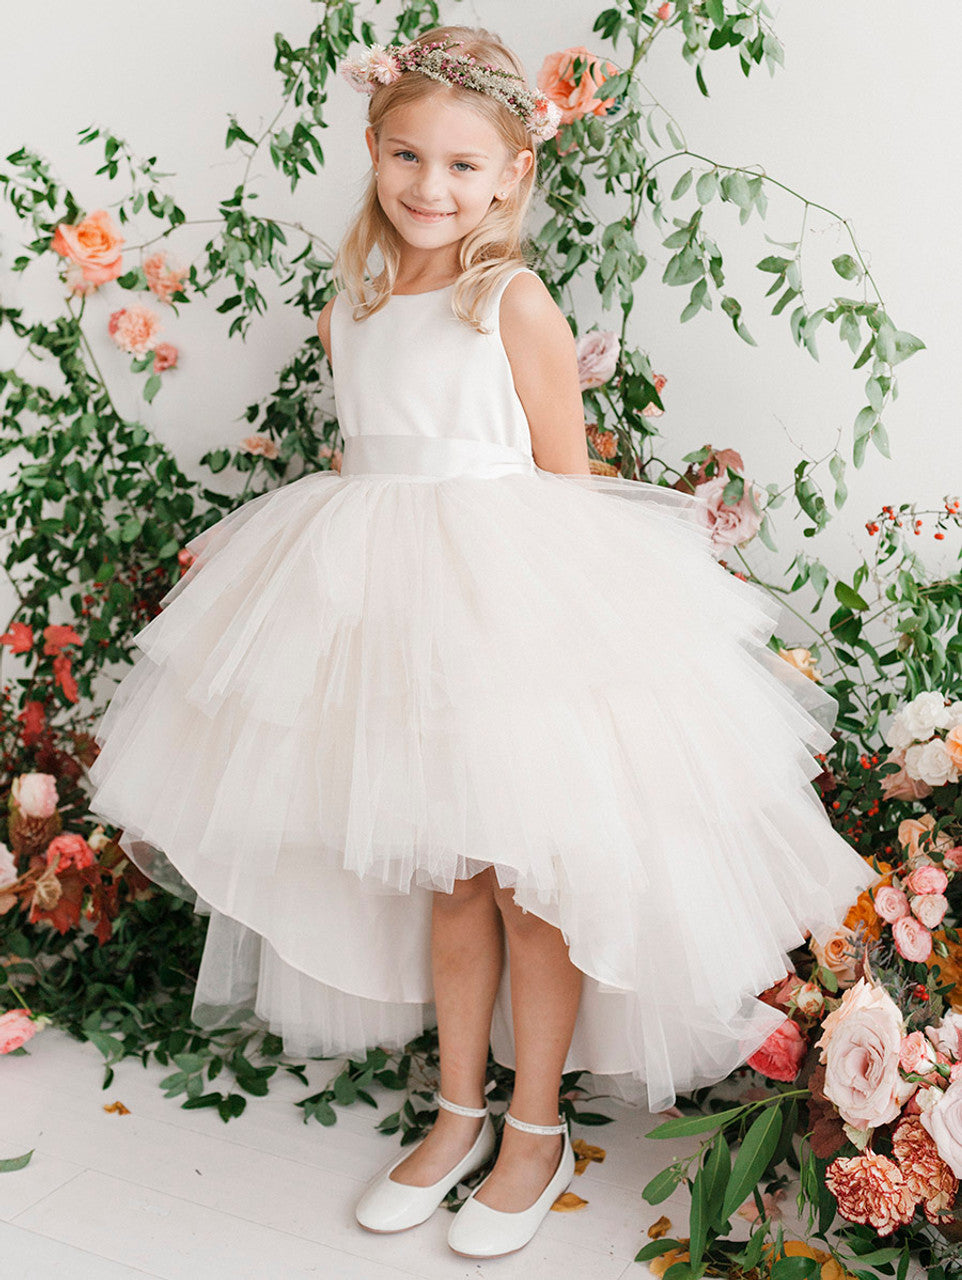 This Tip Top 5658 Girls Layered Tulle High Low Skirt Formal Dress is a perfect choice for that special day. The tulle high-low skirt, satin formal gown, and flower girl satin sash come together to create a beautiful, unique look perfect for flower girls, junior bridesmaids or formal occasions.  Sizes: 6M-16  Colors: Black, Blush, Burgundy, Eggplant, Ivory, Red, Royal Blue, White, Champagne, Lilac, Sky Blue